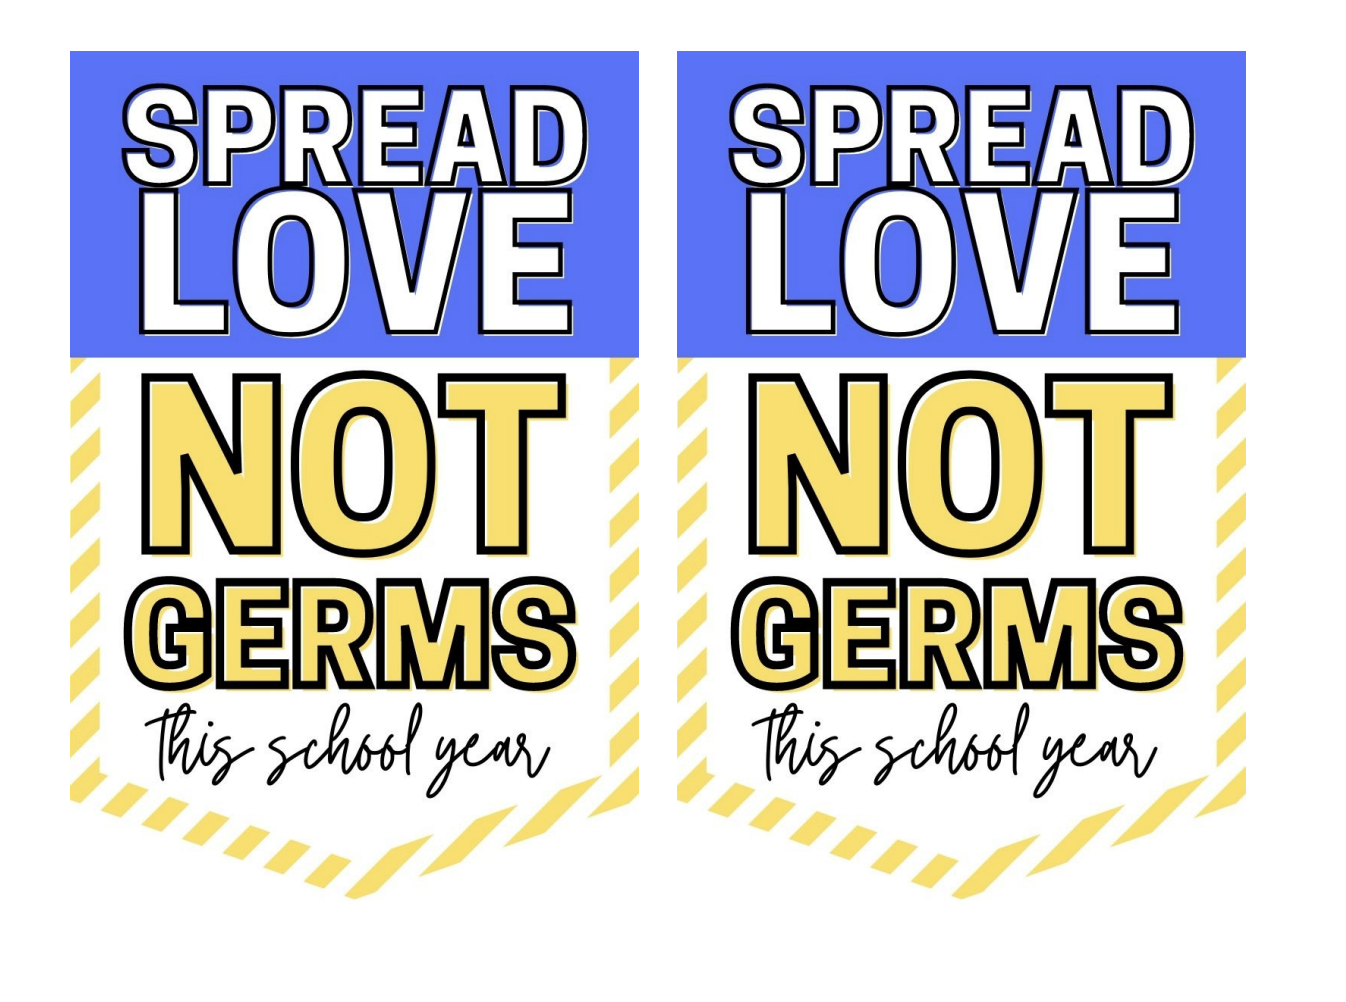 Image of printable that says spread love not germs